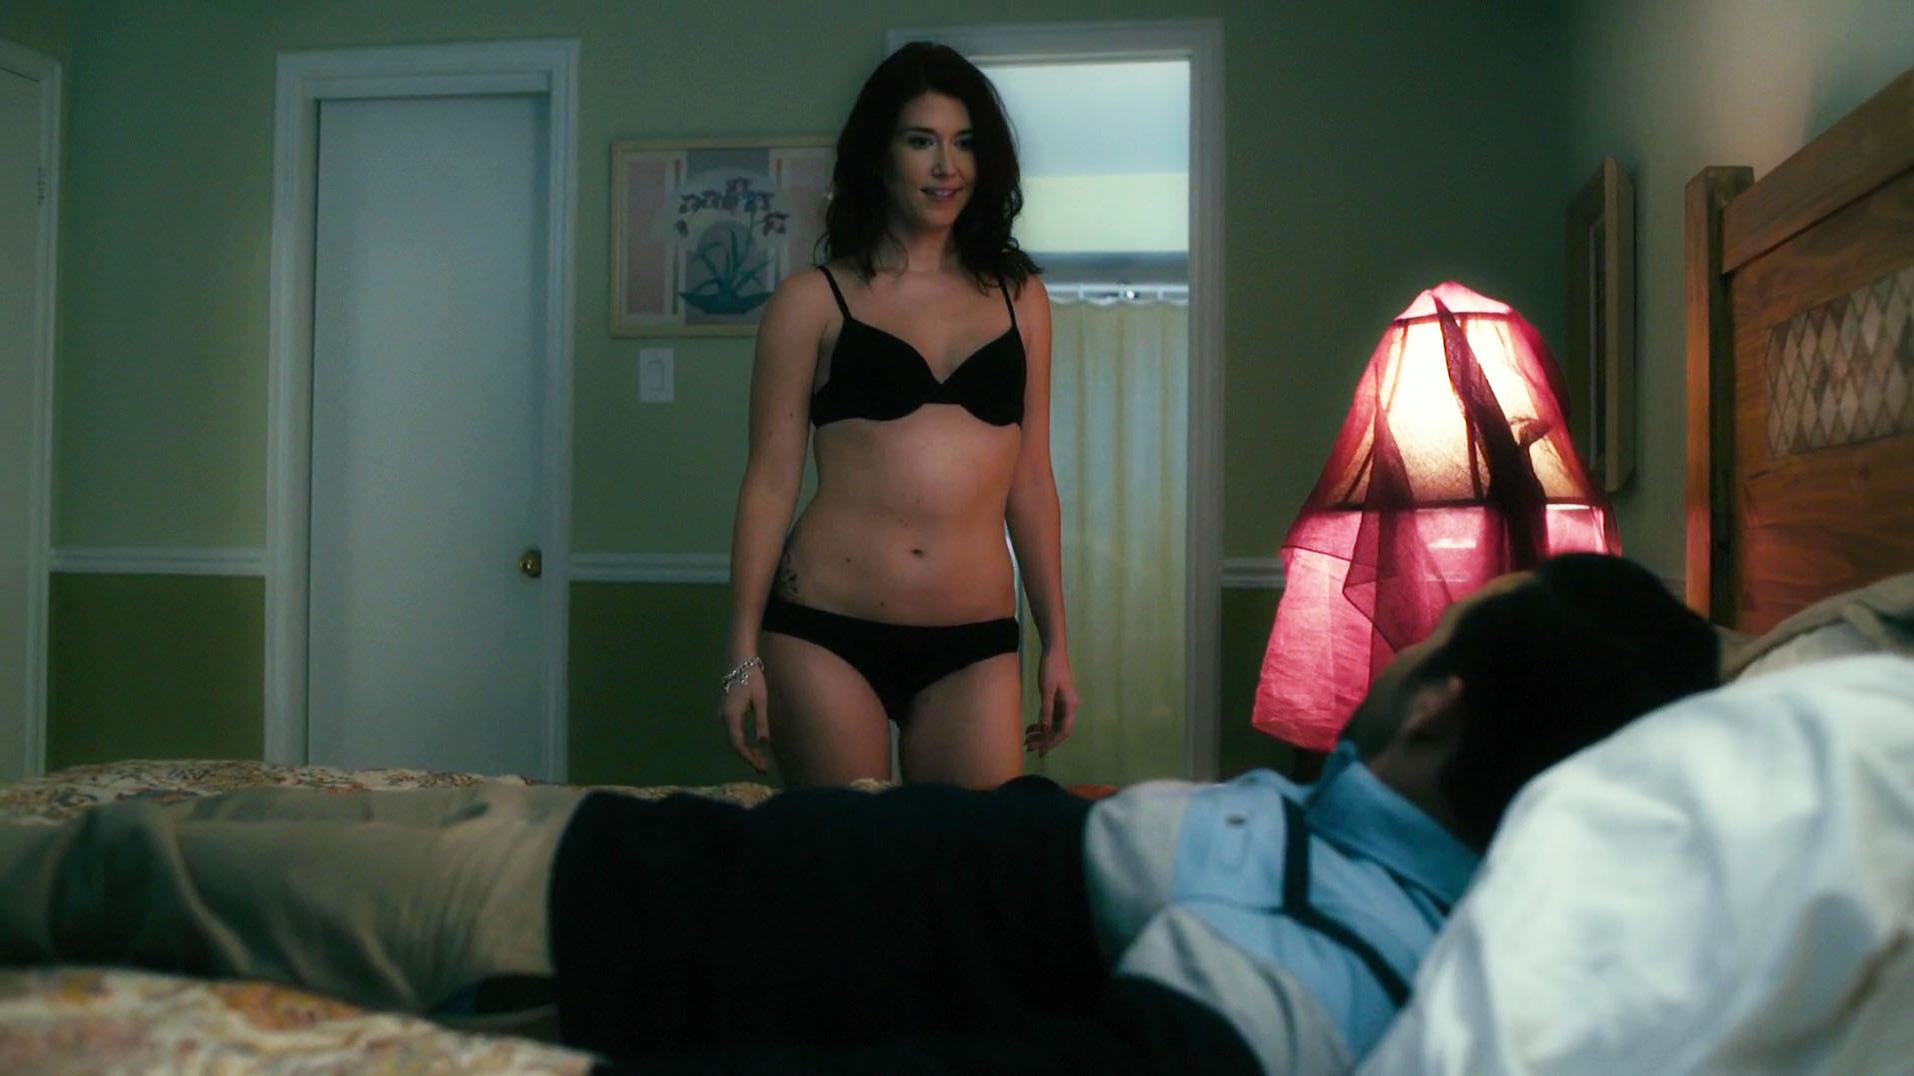 Jewel Staite nude - How to Plan an Orgy in a Small Town (2015)